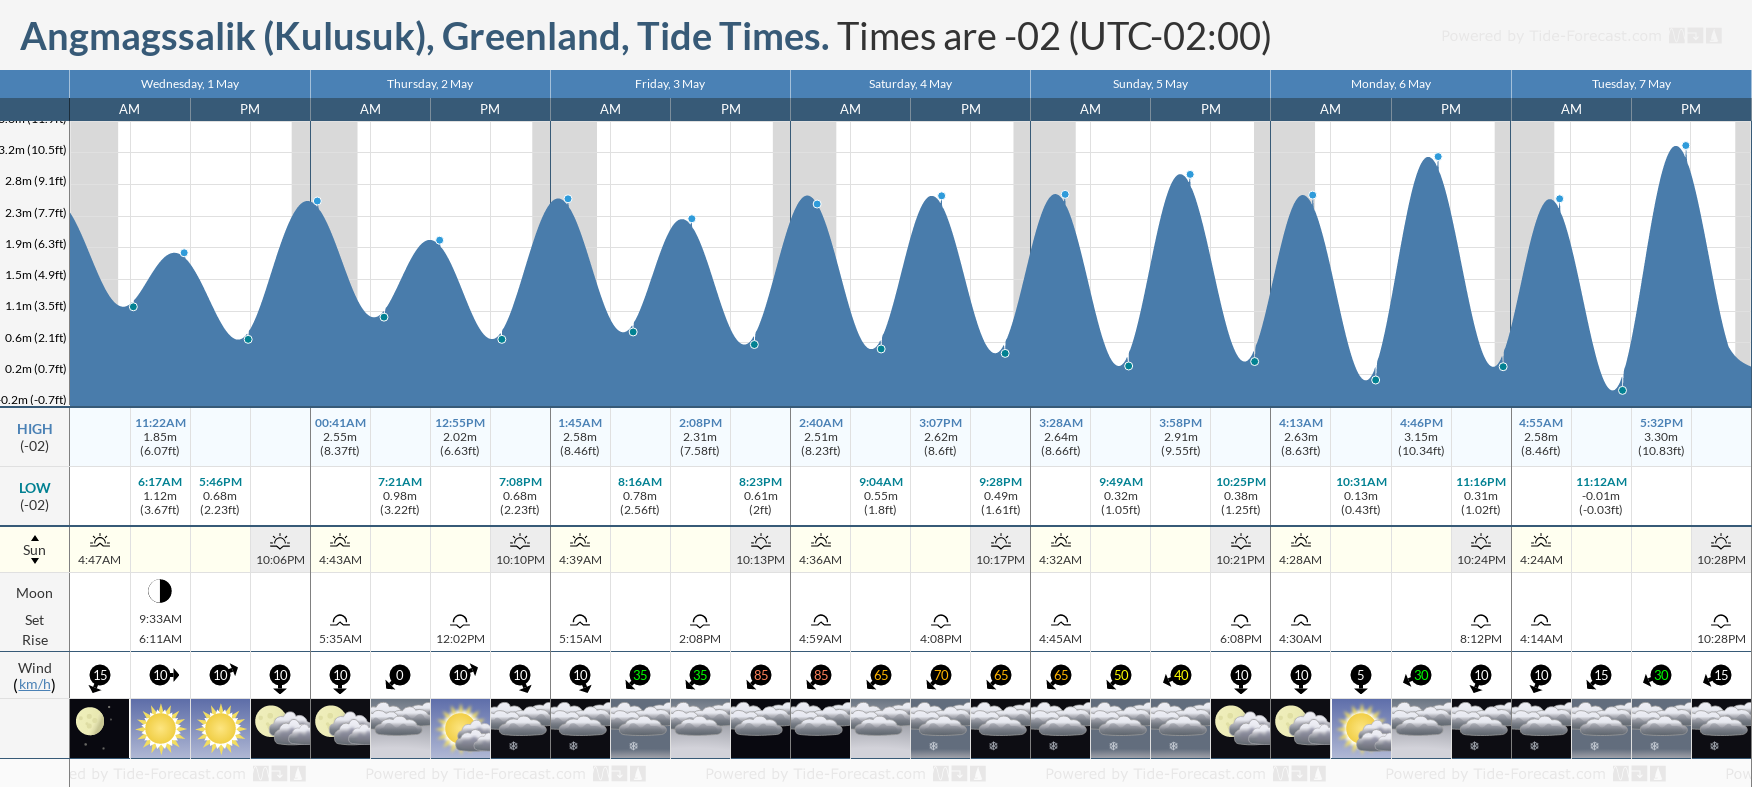 Angmagssalik (Kulusuk), Greenland Tide Chart including high and low tide tide times for the next 7 days